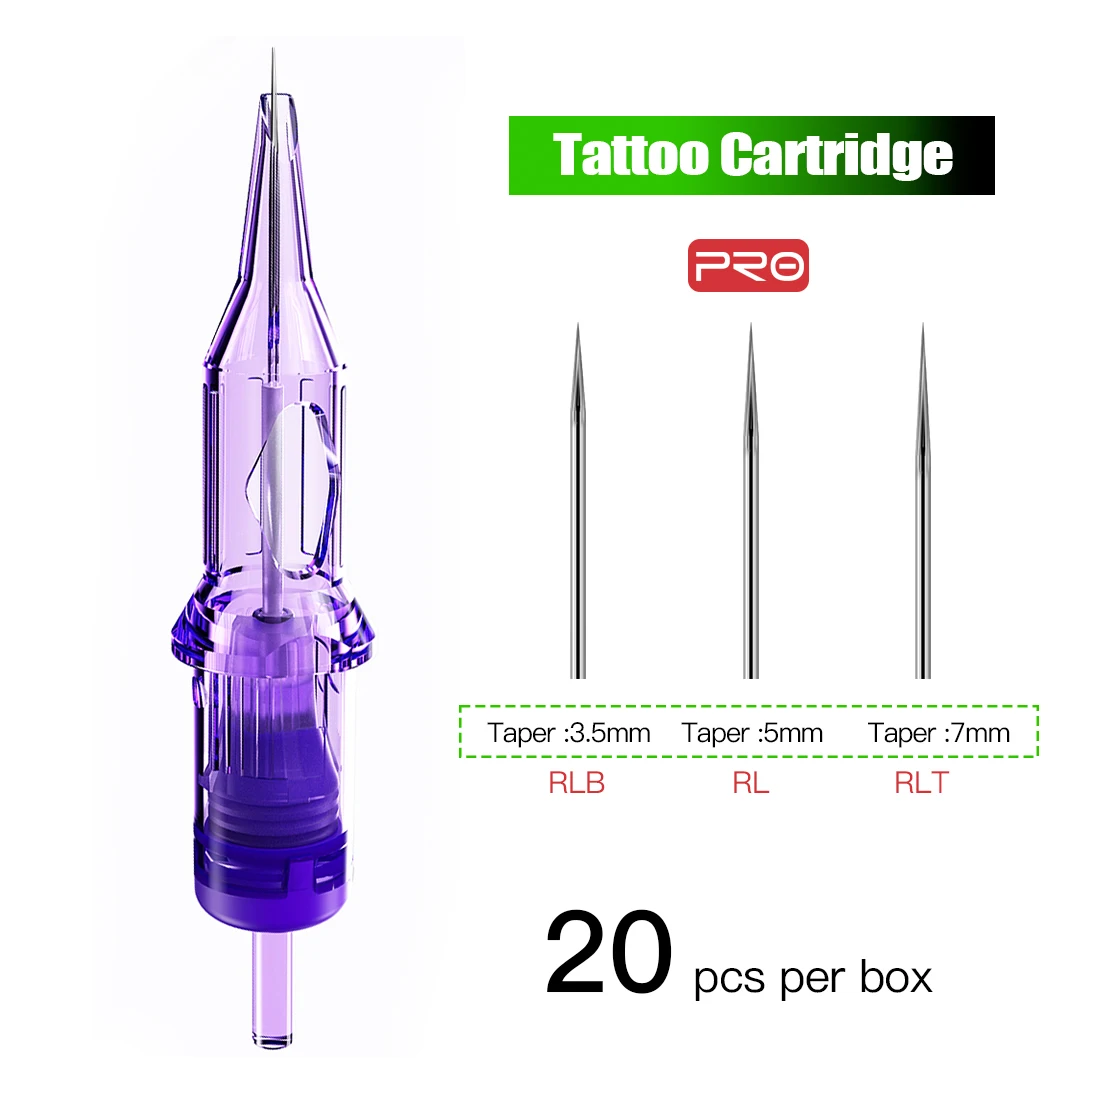 Disposable Box Of 20pcs Sterile Tattoo Cartridge Needles For Tattoo Rotary Pen Round Liner Supplies